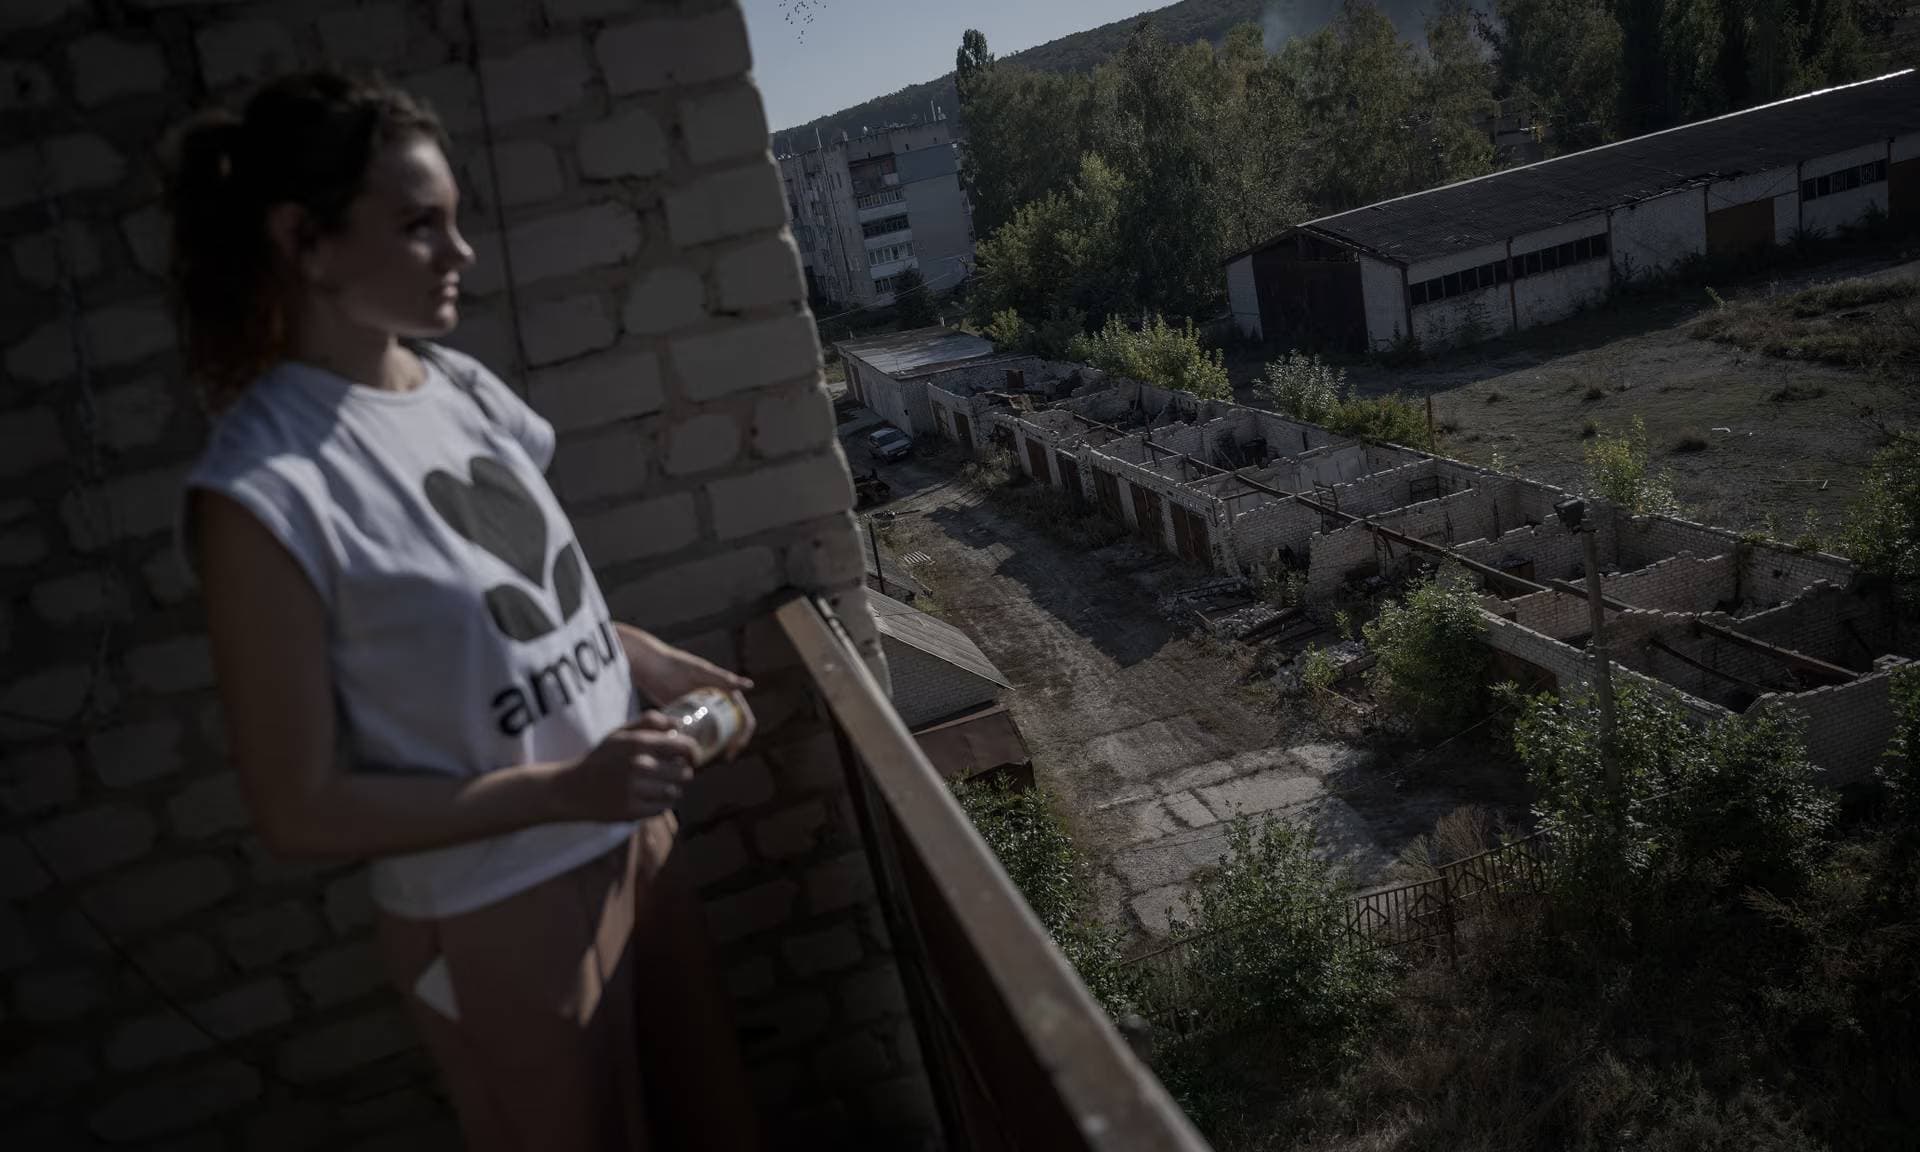 Alyona looks out from the balcony of her house damaged during the Russian attack in the Staryi Saltiv